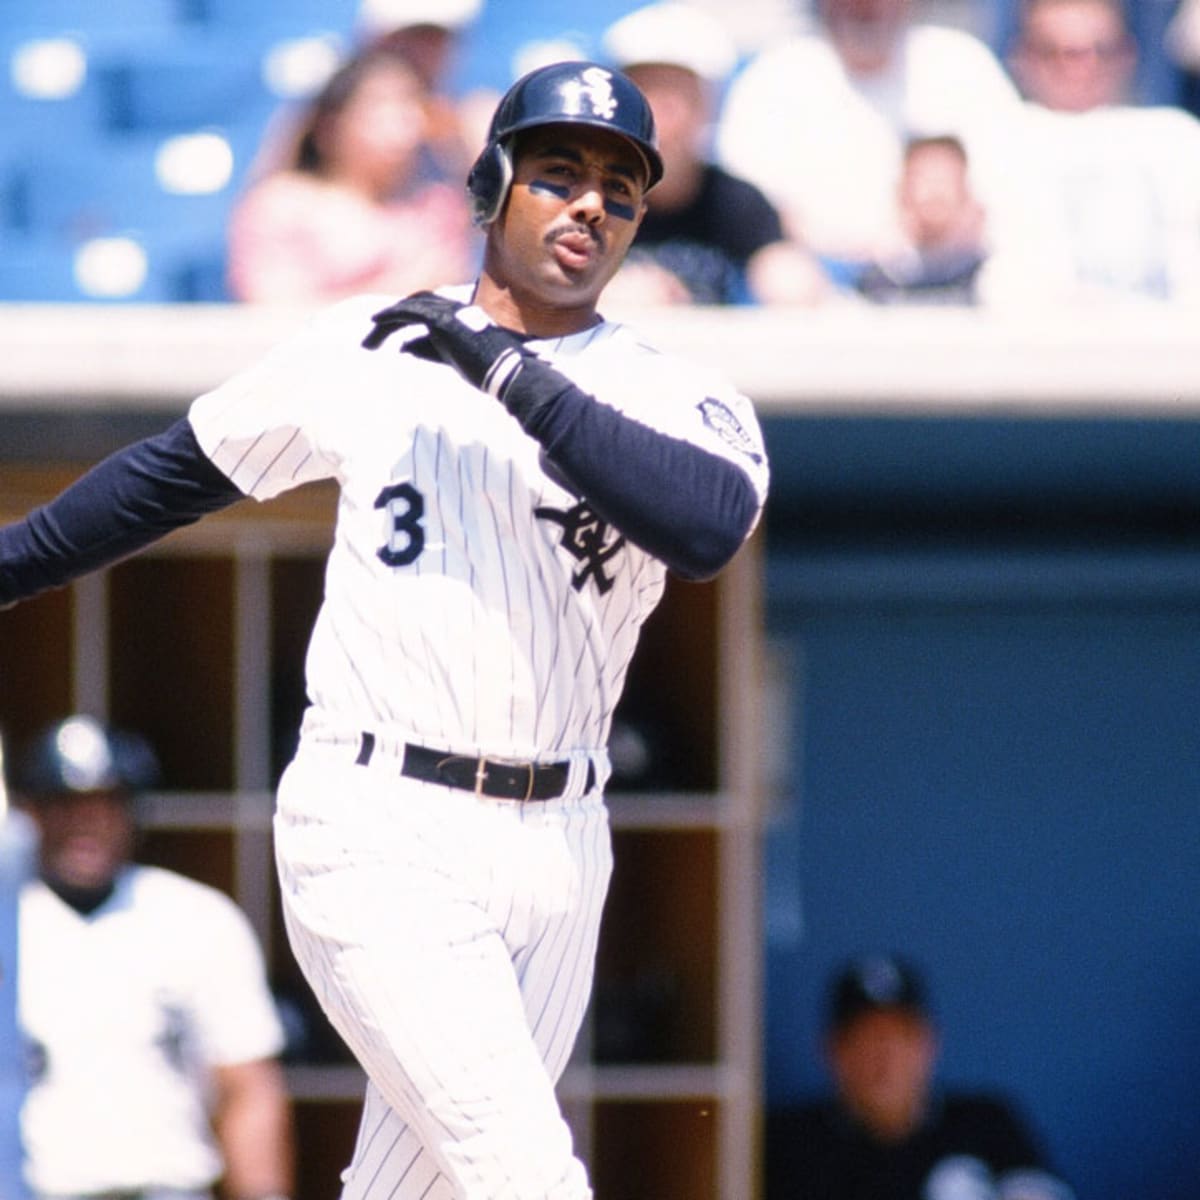 Harold Baines is a Hall of Famer because of an absurd process